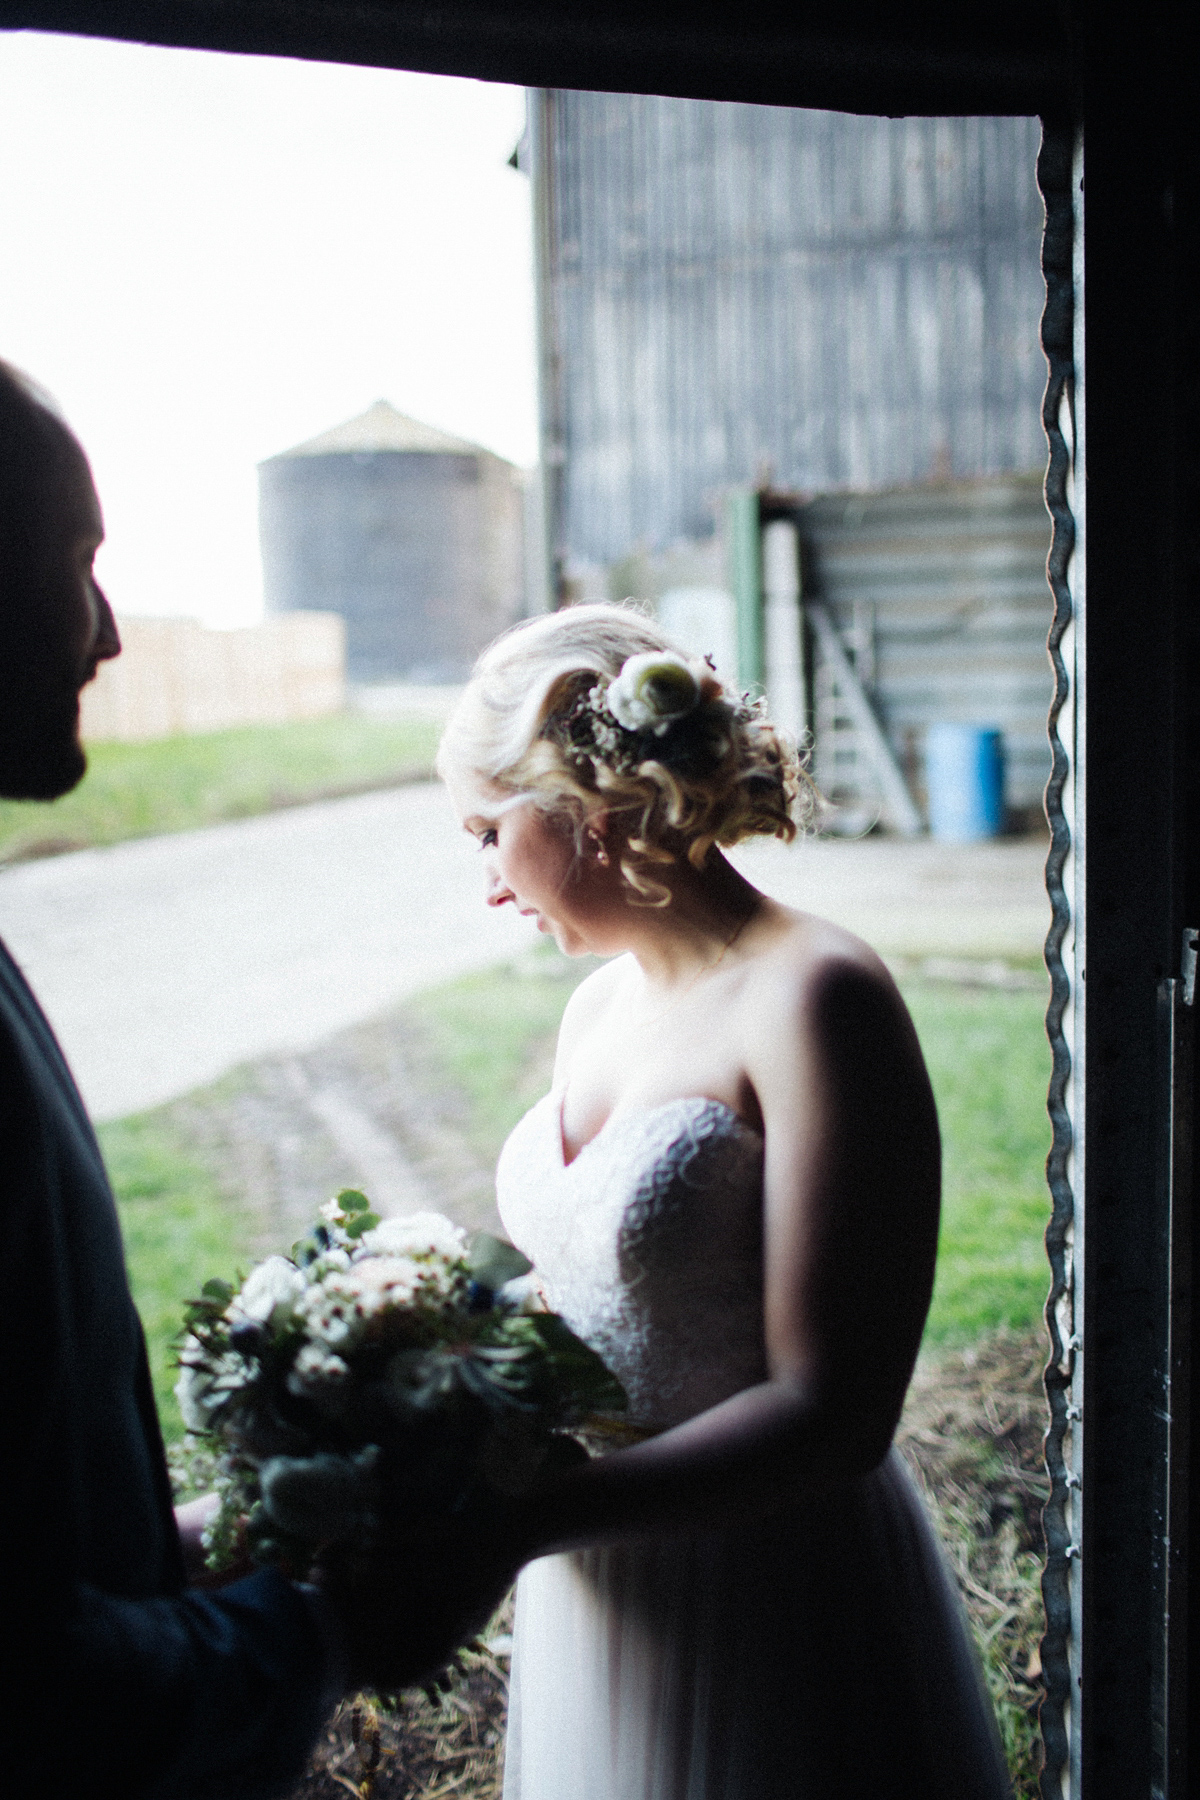 Zena and Tom's woodland glam inspired wedding was held in a beautiful barn in the spring time. Photography by Claudia Rose Carter.